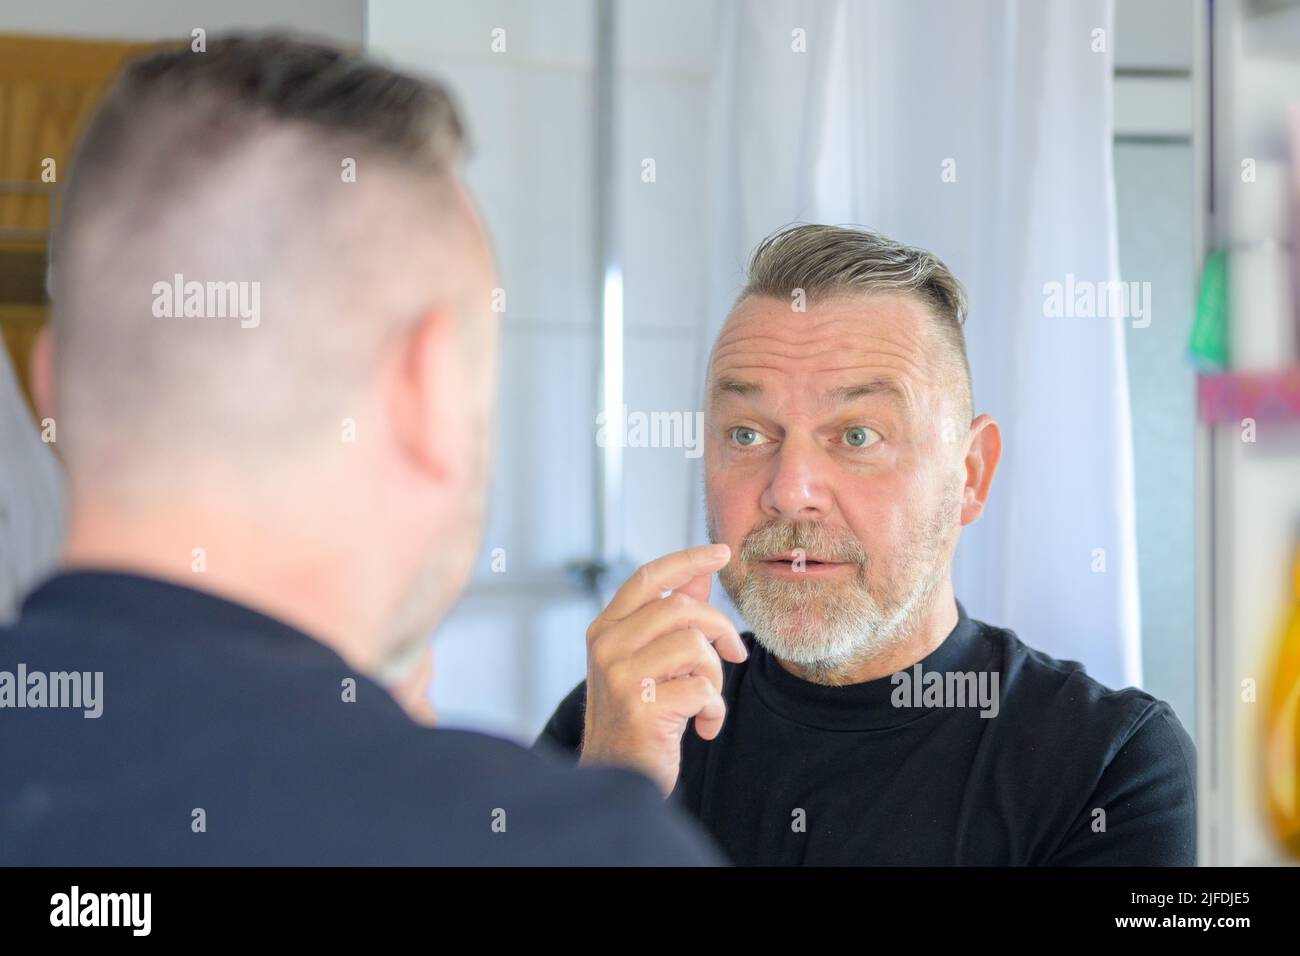 Dismayed middle-aged man looking at the fleshy bags under his eyes with a view to his reflection in the mirror Stock Photo